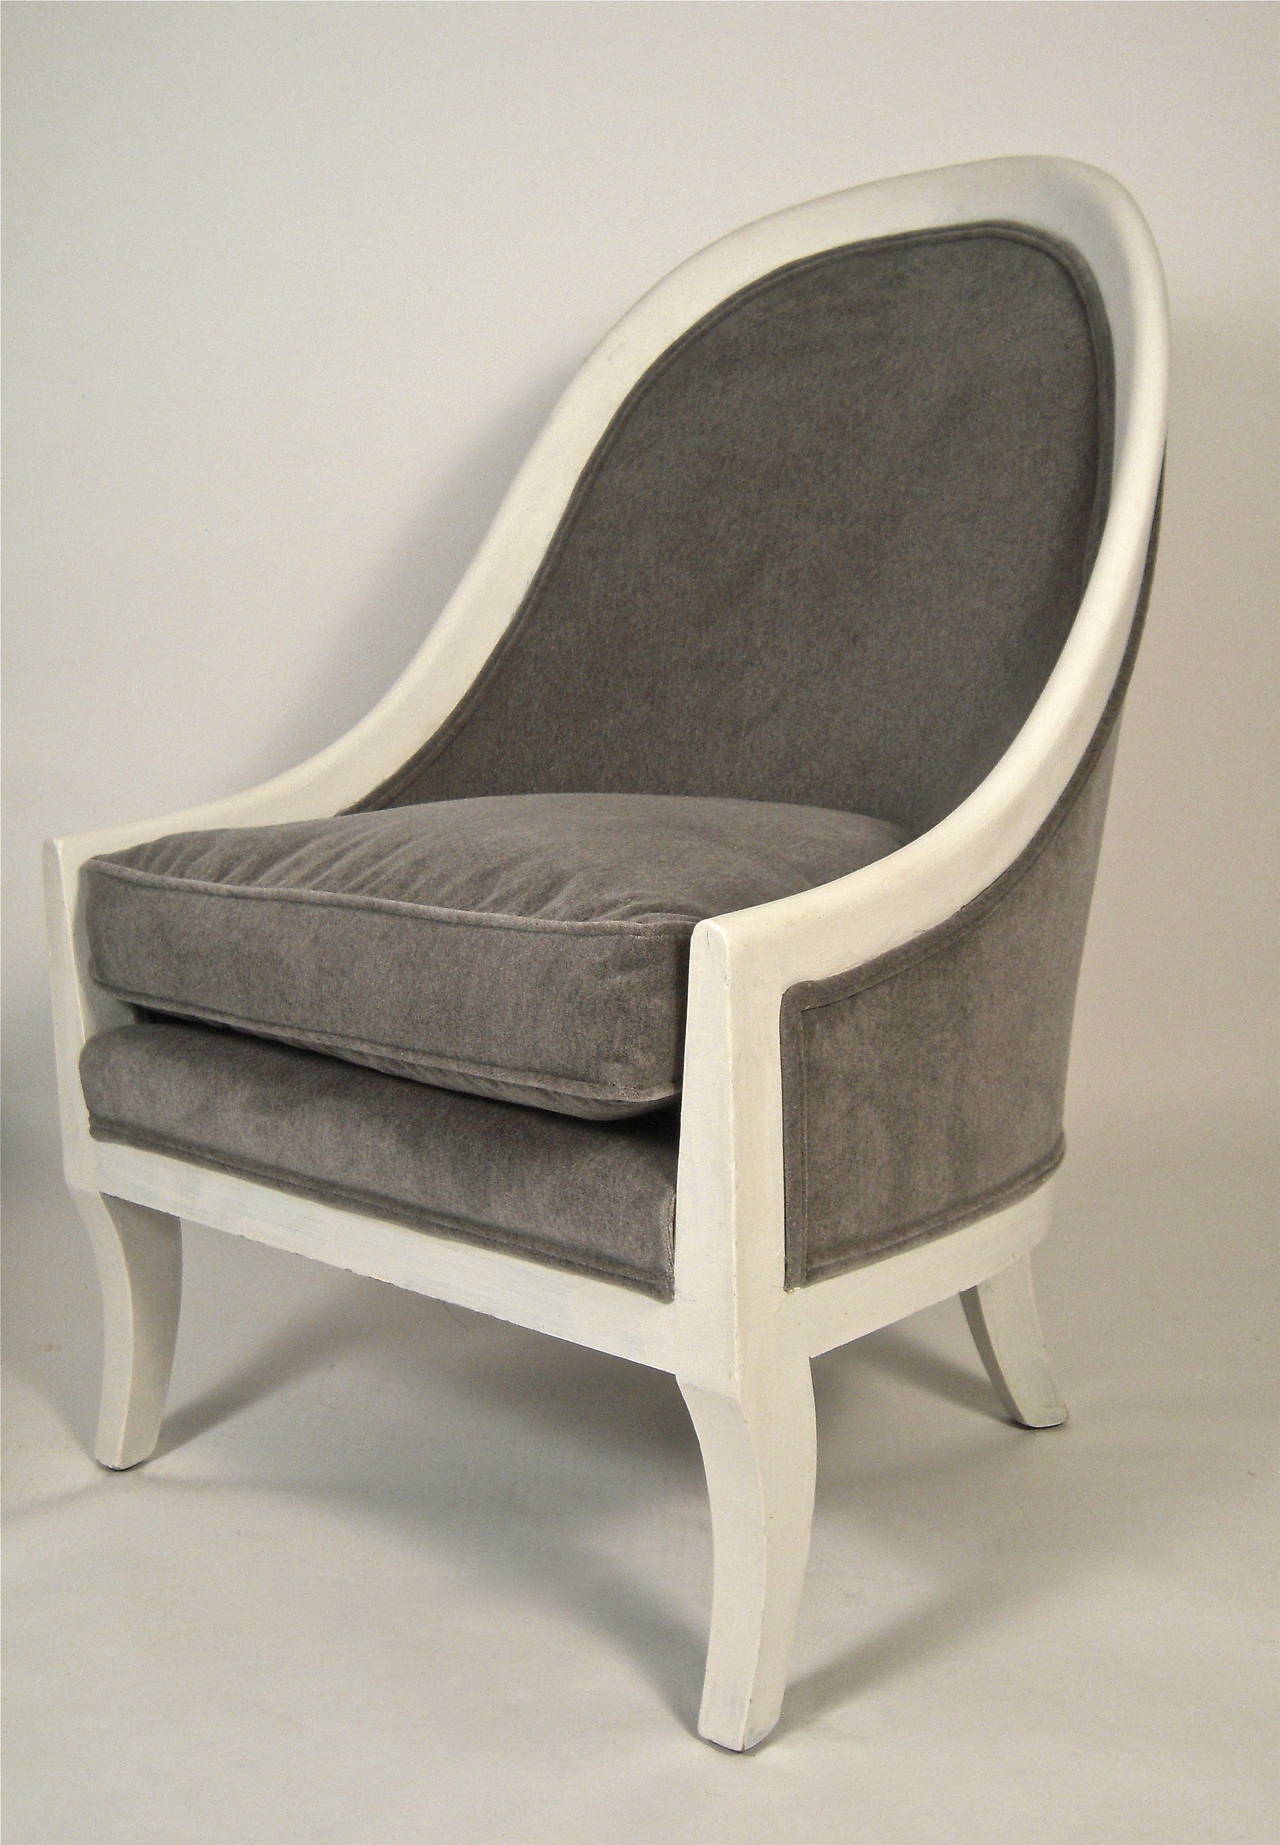 Mid-20th Century Pair of Regency Style Gondola Back Upholstered Chairs